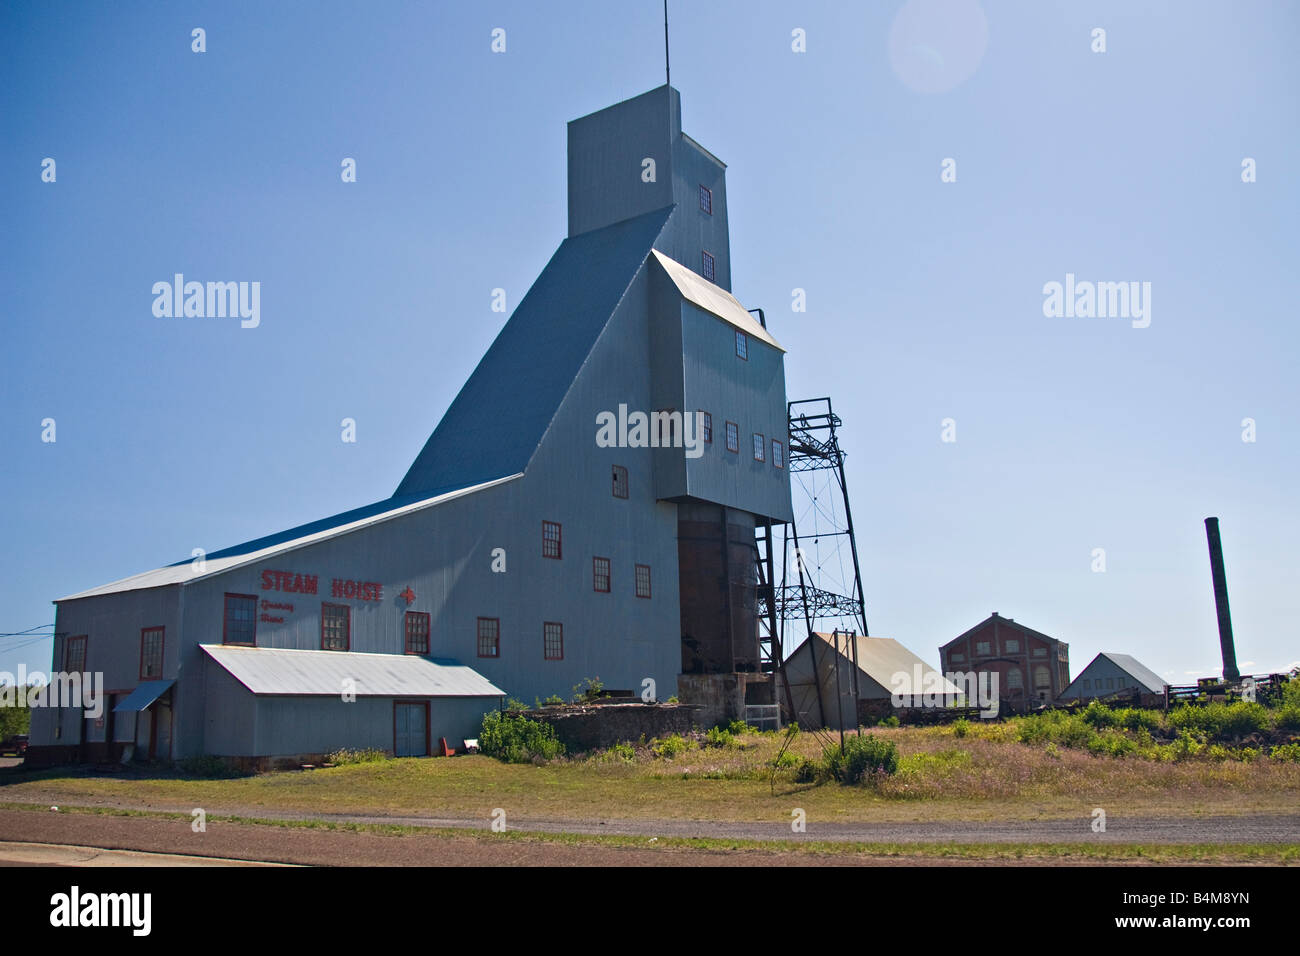 The Quincy Mine and Hoist historic copper mining site in Hancock Michigan Stock Photo